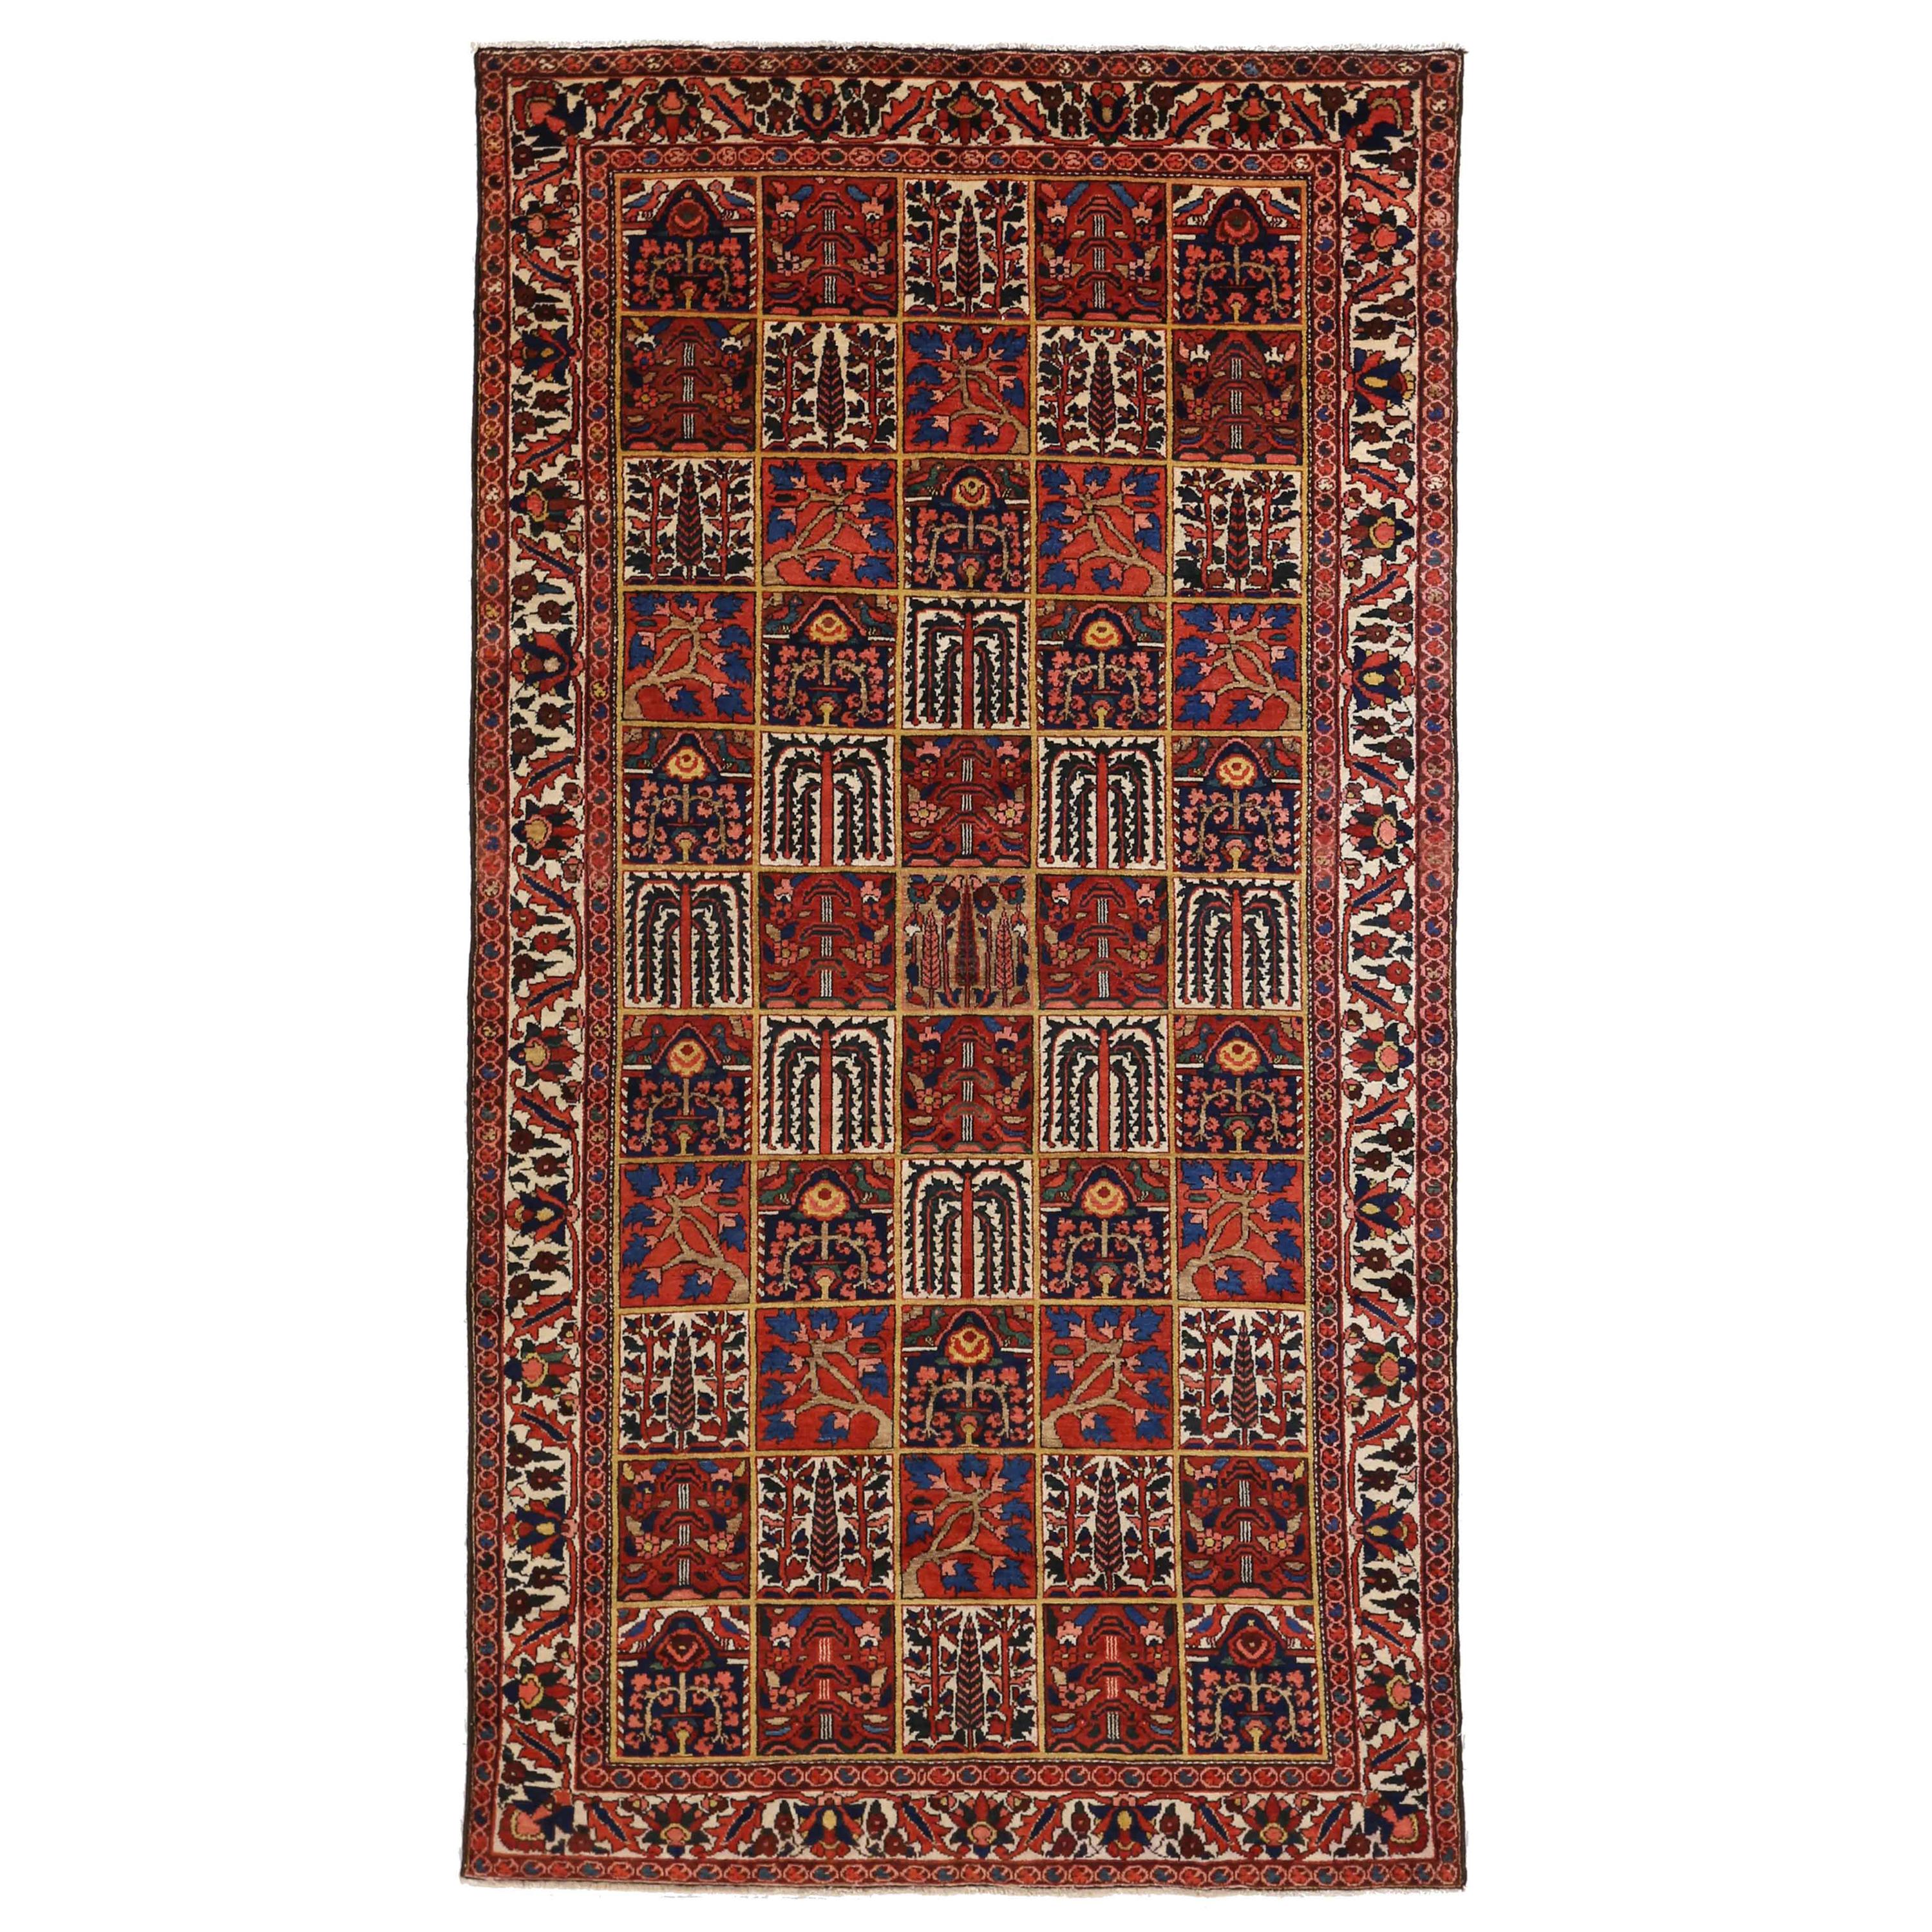 Antique Persian Bakhtiar Rug with Red, Blue and White Floral Tile Details